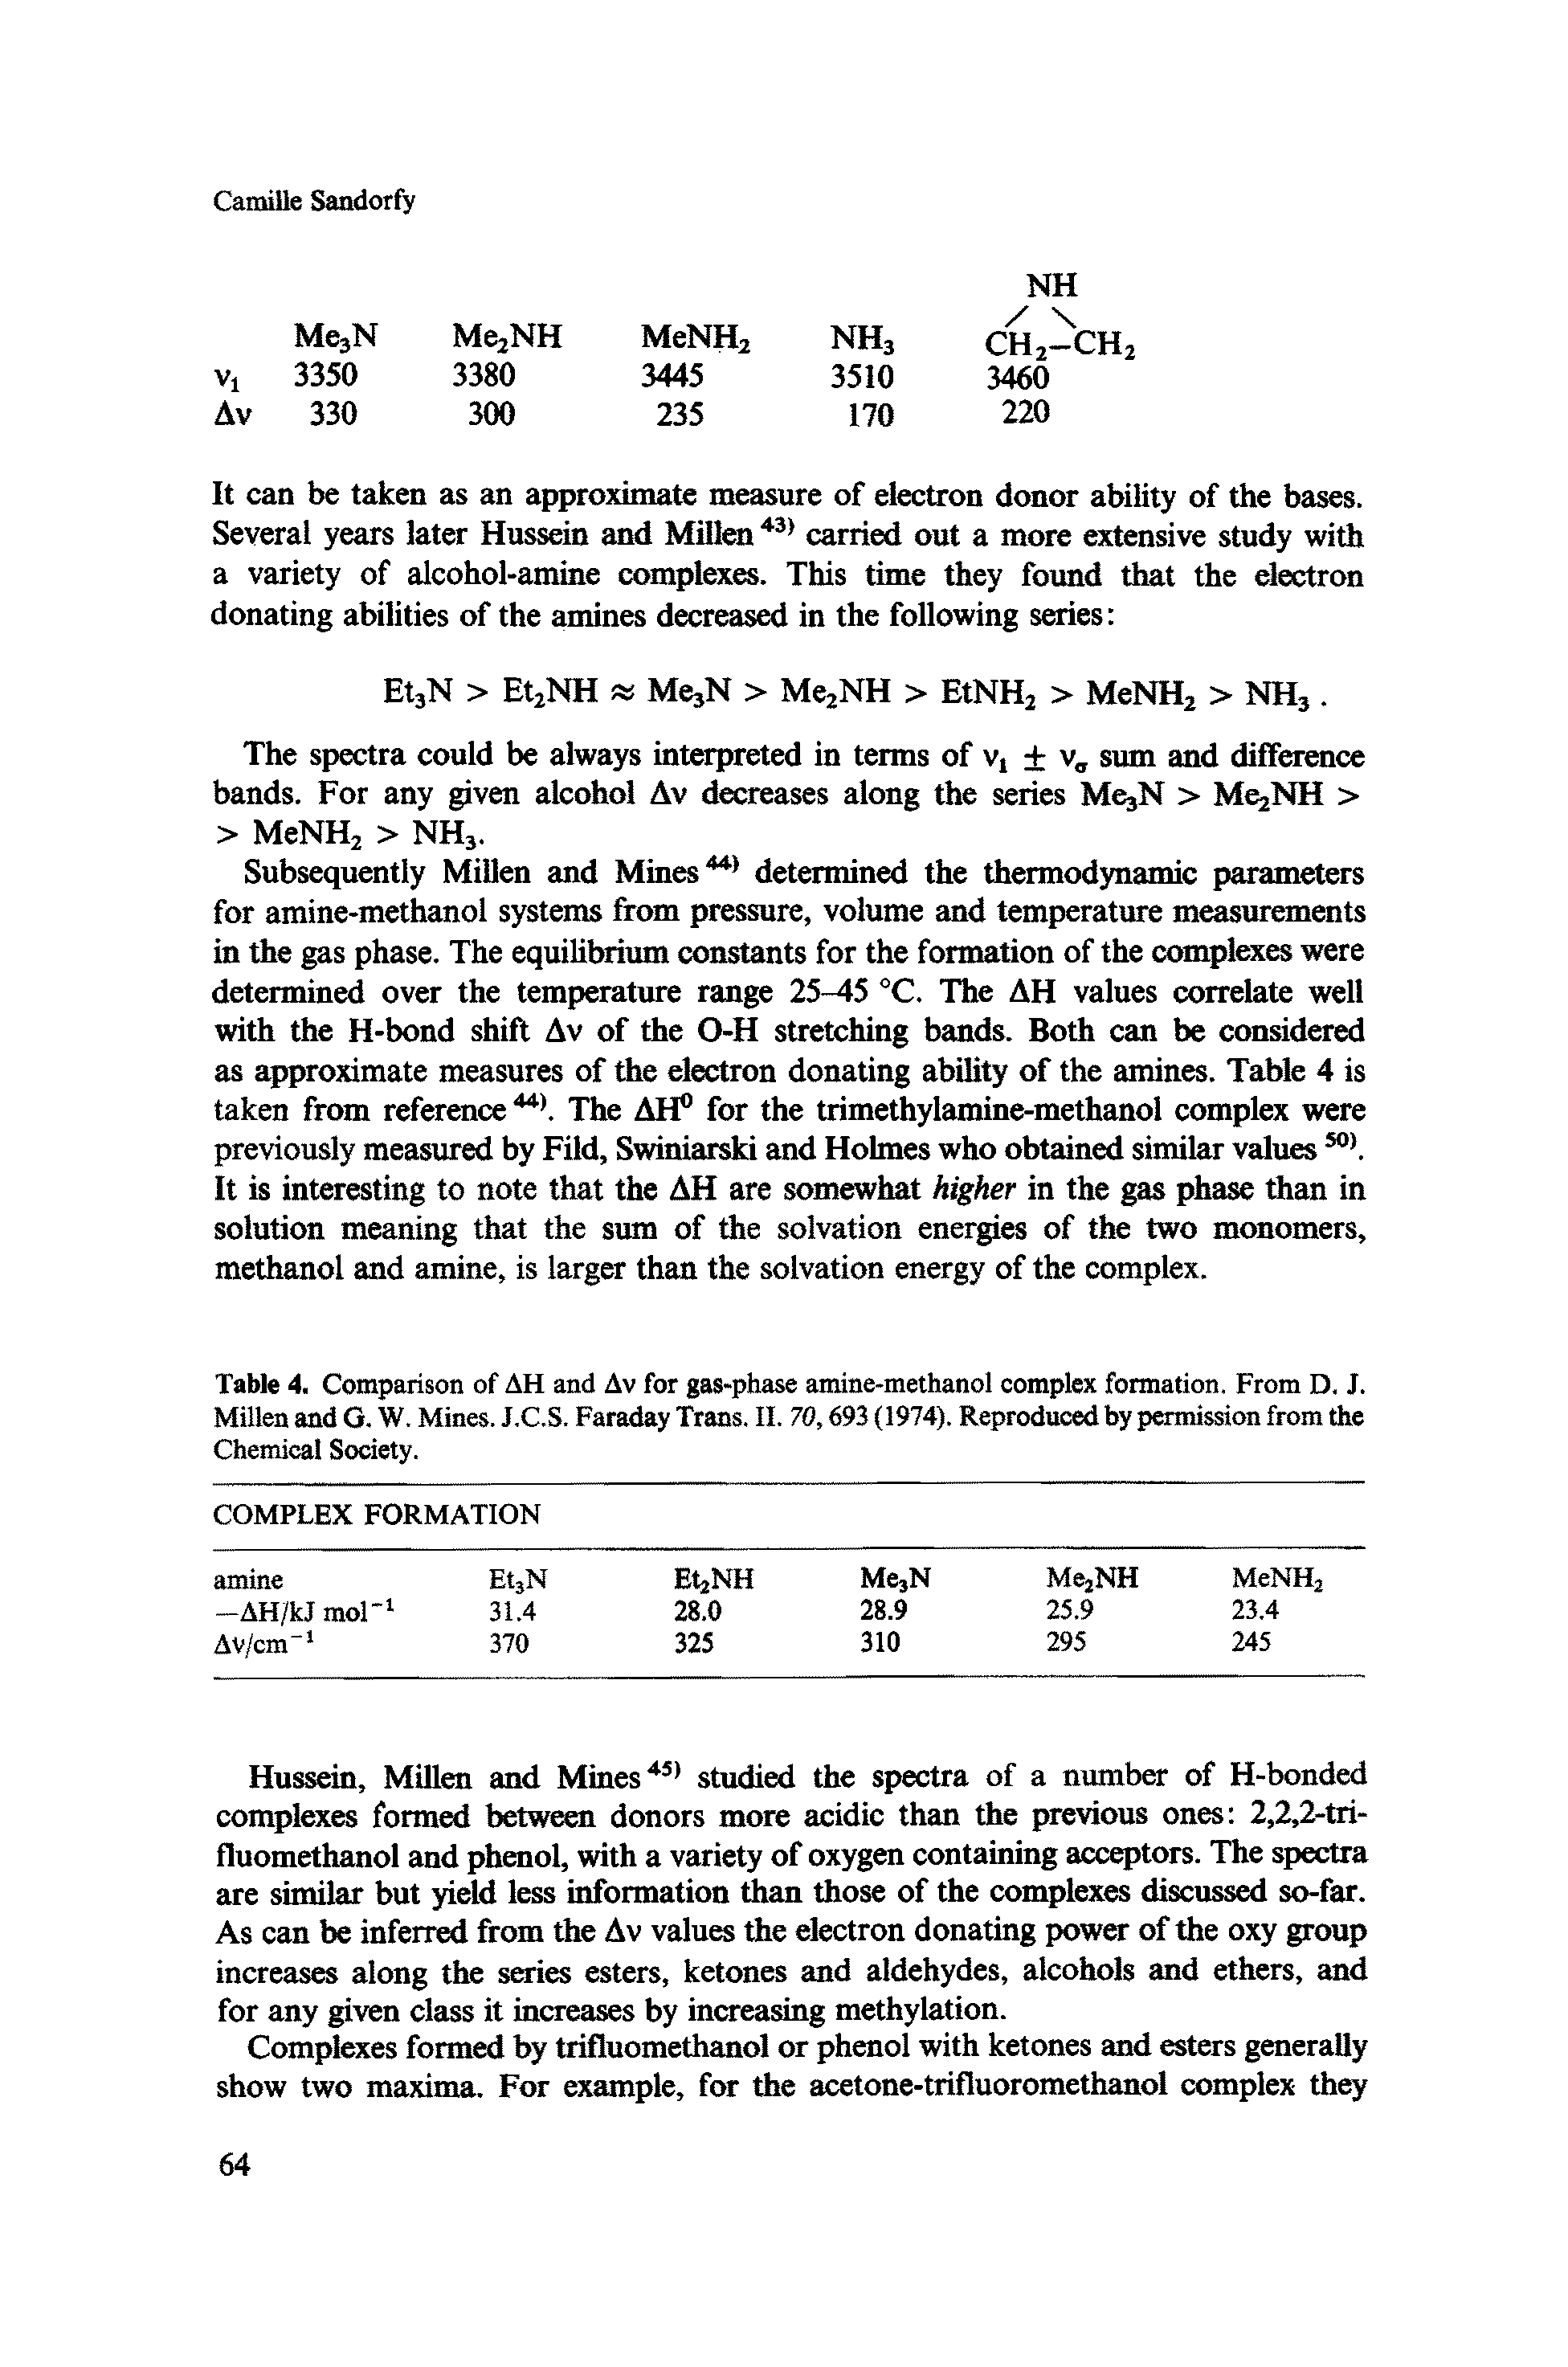 Table 4. Comparison of AH and Av for gas-phase amine-methanol complex formation. From D. J. Millen and G. W. Mines. J.C.S. Faraday Trans. II. 70,693 (1974). Reproduced by permission from the Chemical Society.